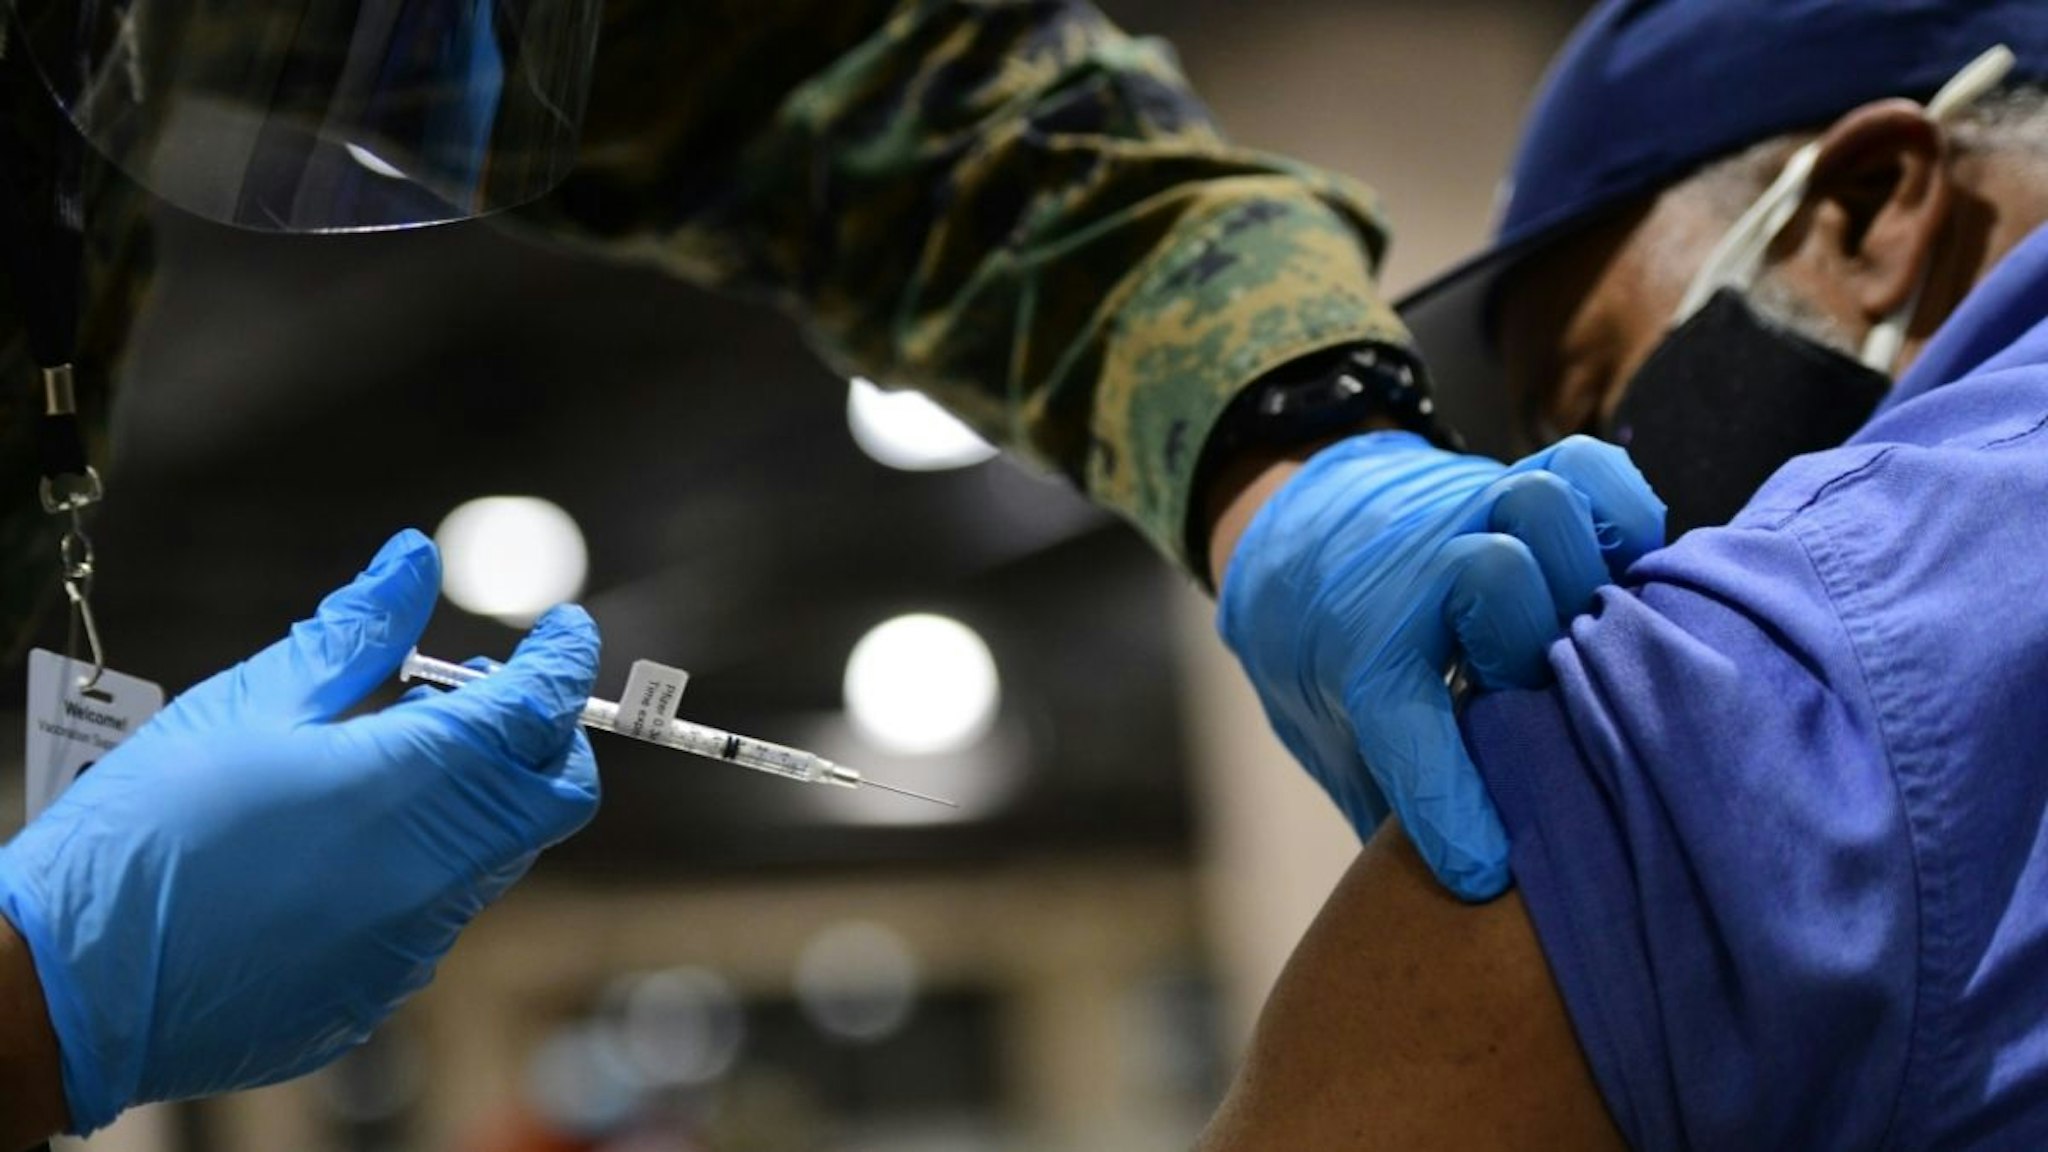 A member of the U.S. Armed Forces administers a dose of the Pfizer COVID-19 vaccine at a FEMA community vaccination center on March 2, 2021 in Philadelphia, Pennsylvania.